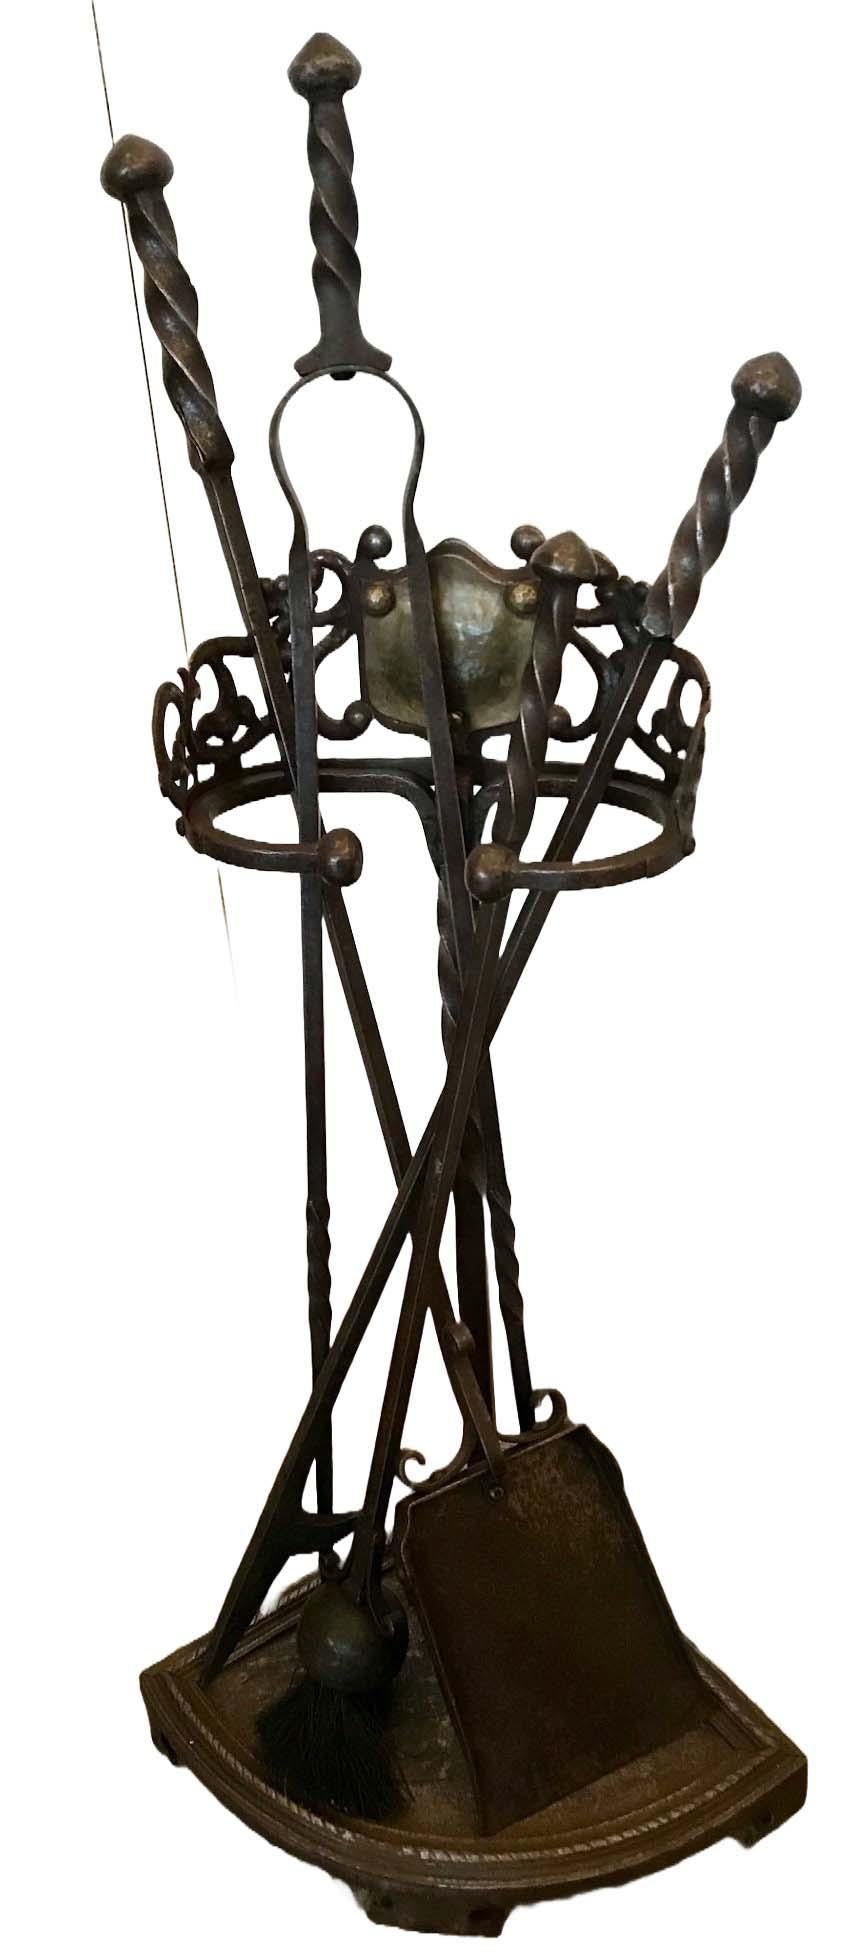 This set is the creation of a talented Arts and Craft artisan and is in the manner of the works of Paul Beau, Montreal.
It is handcrafted in the Arts & Crafts period and of the finest and hardiest wrought iron and will stand proudly as the